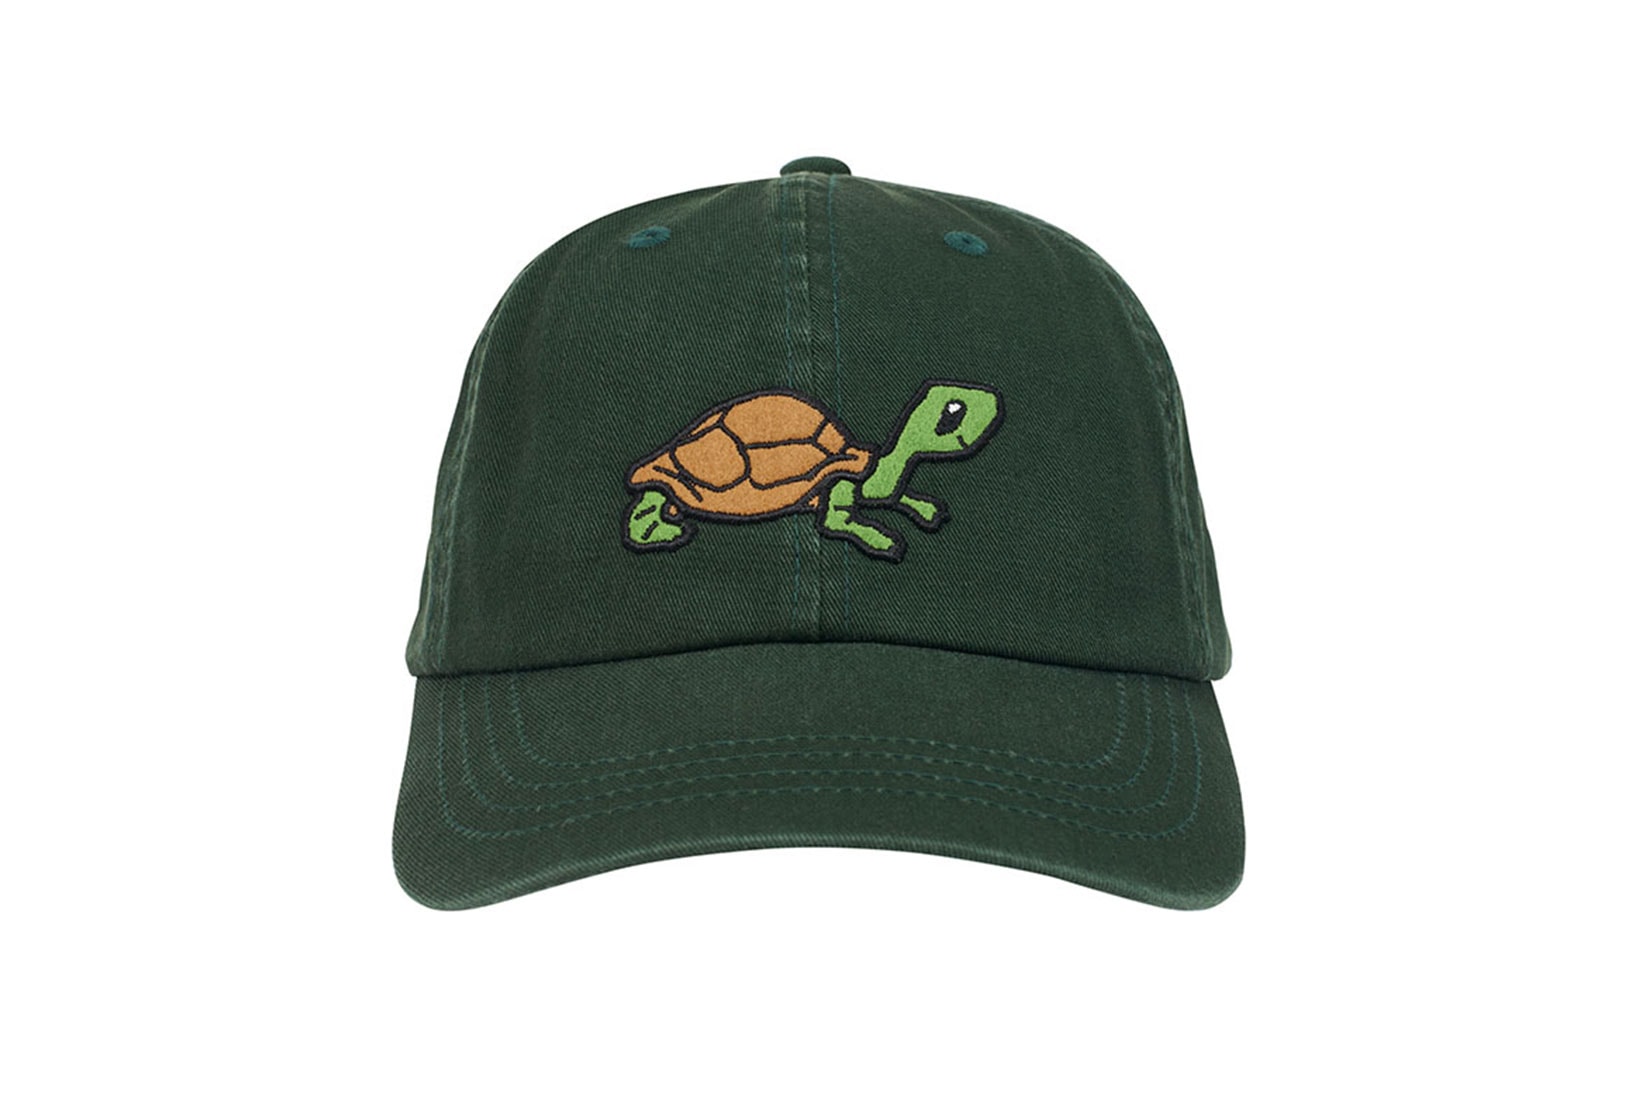 palace spring drop 4 collection logo cap hat graphic turtle